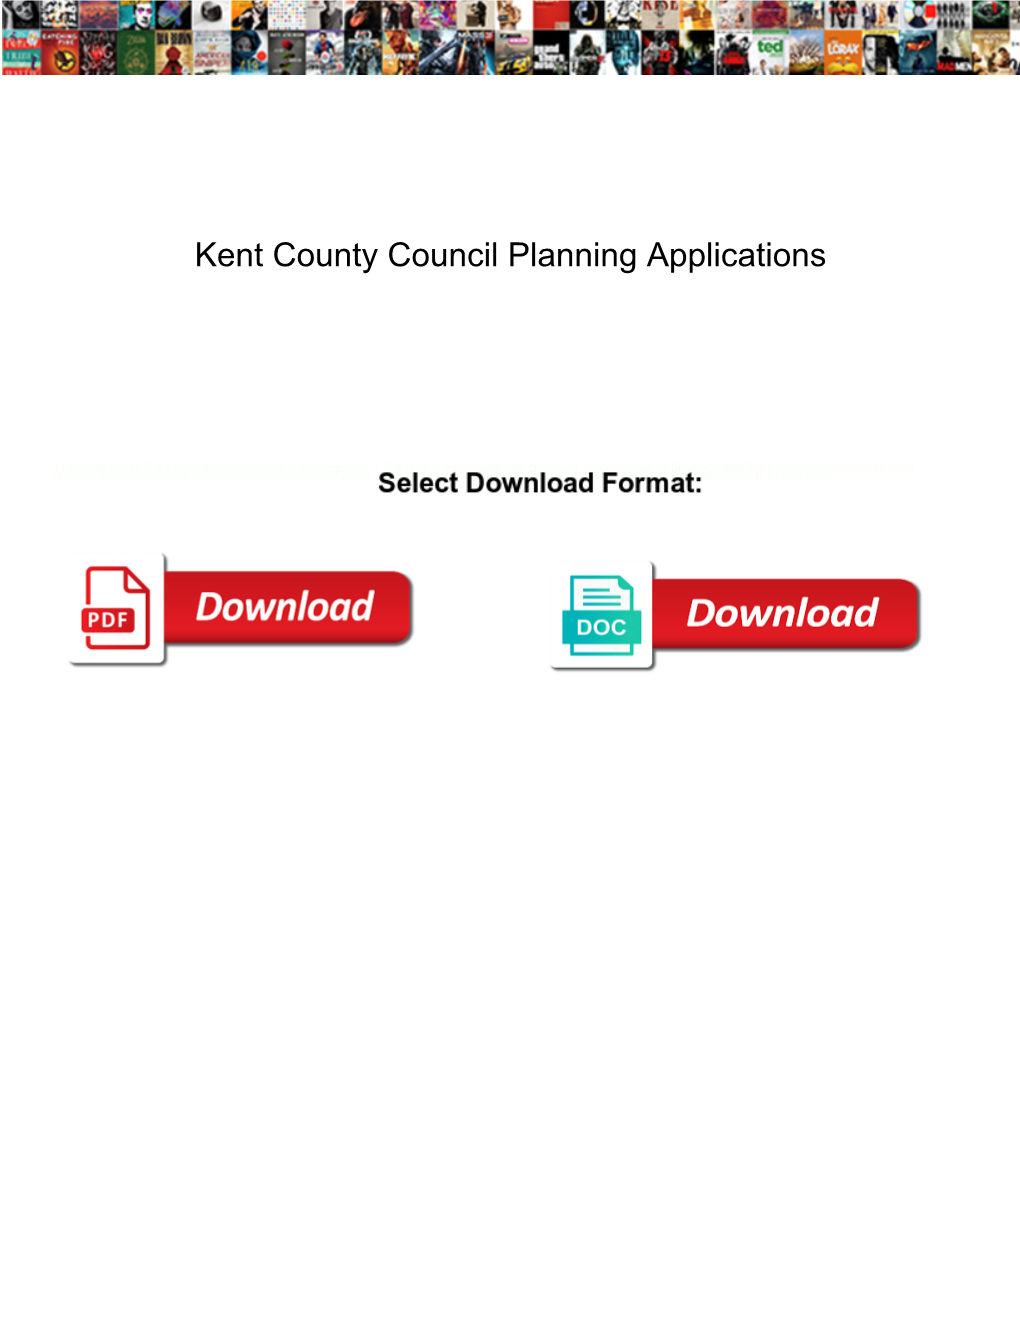 Kent County Council Planning Applications